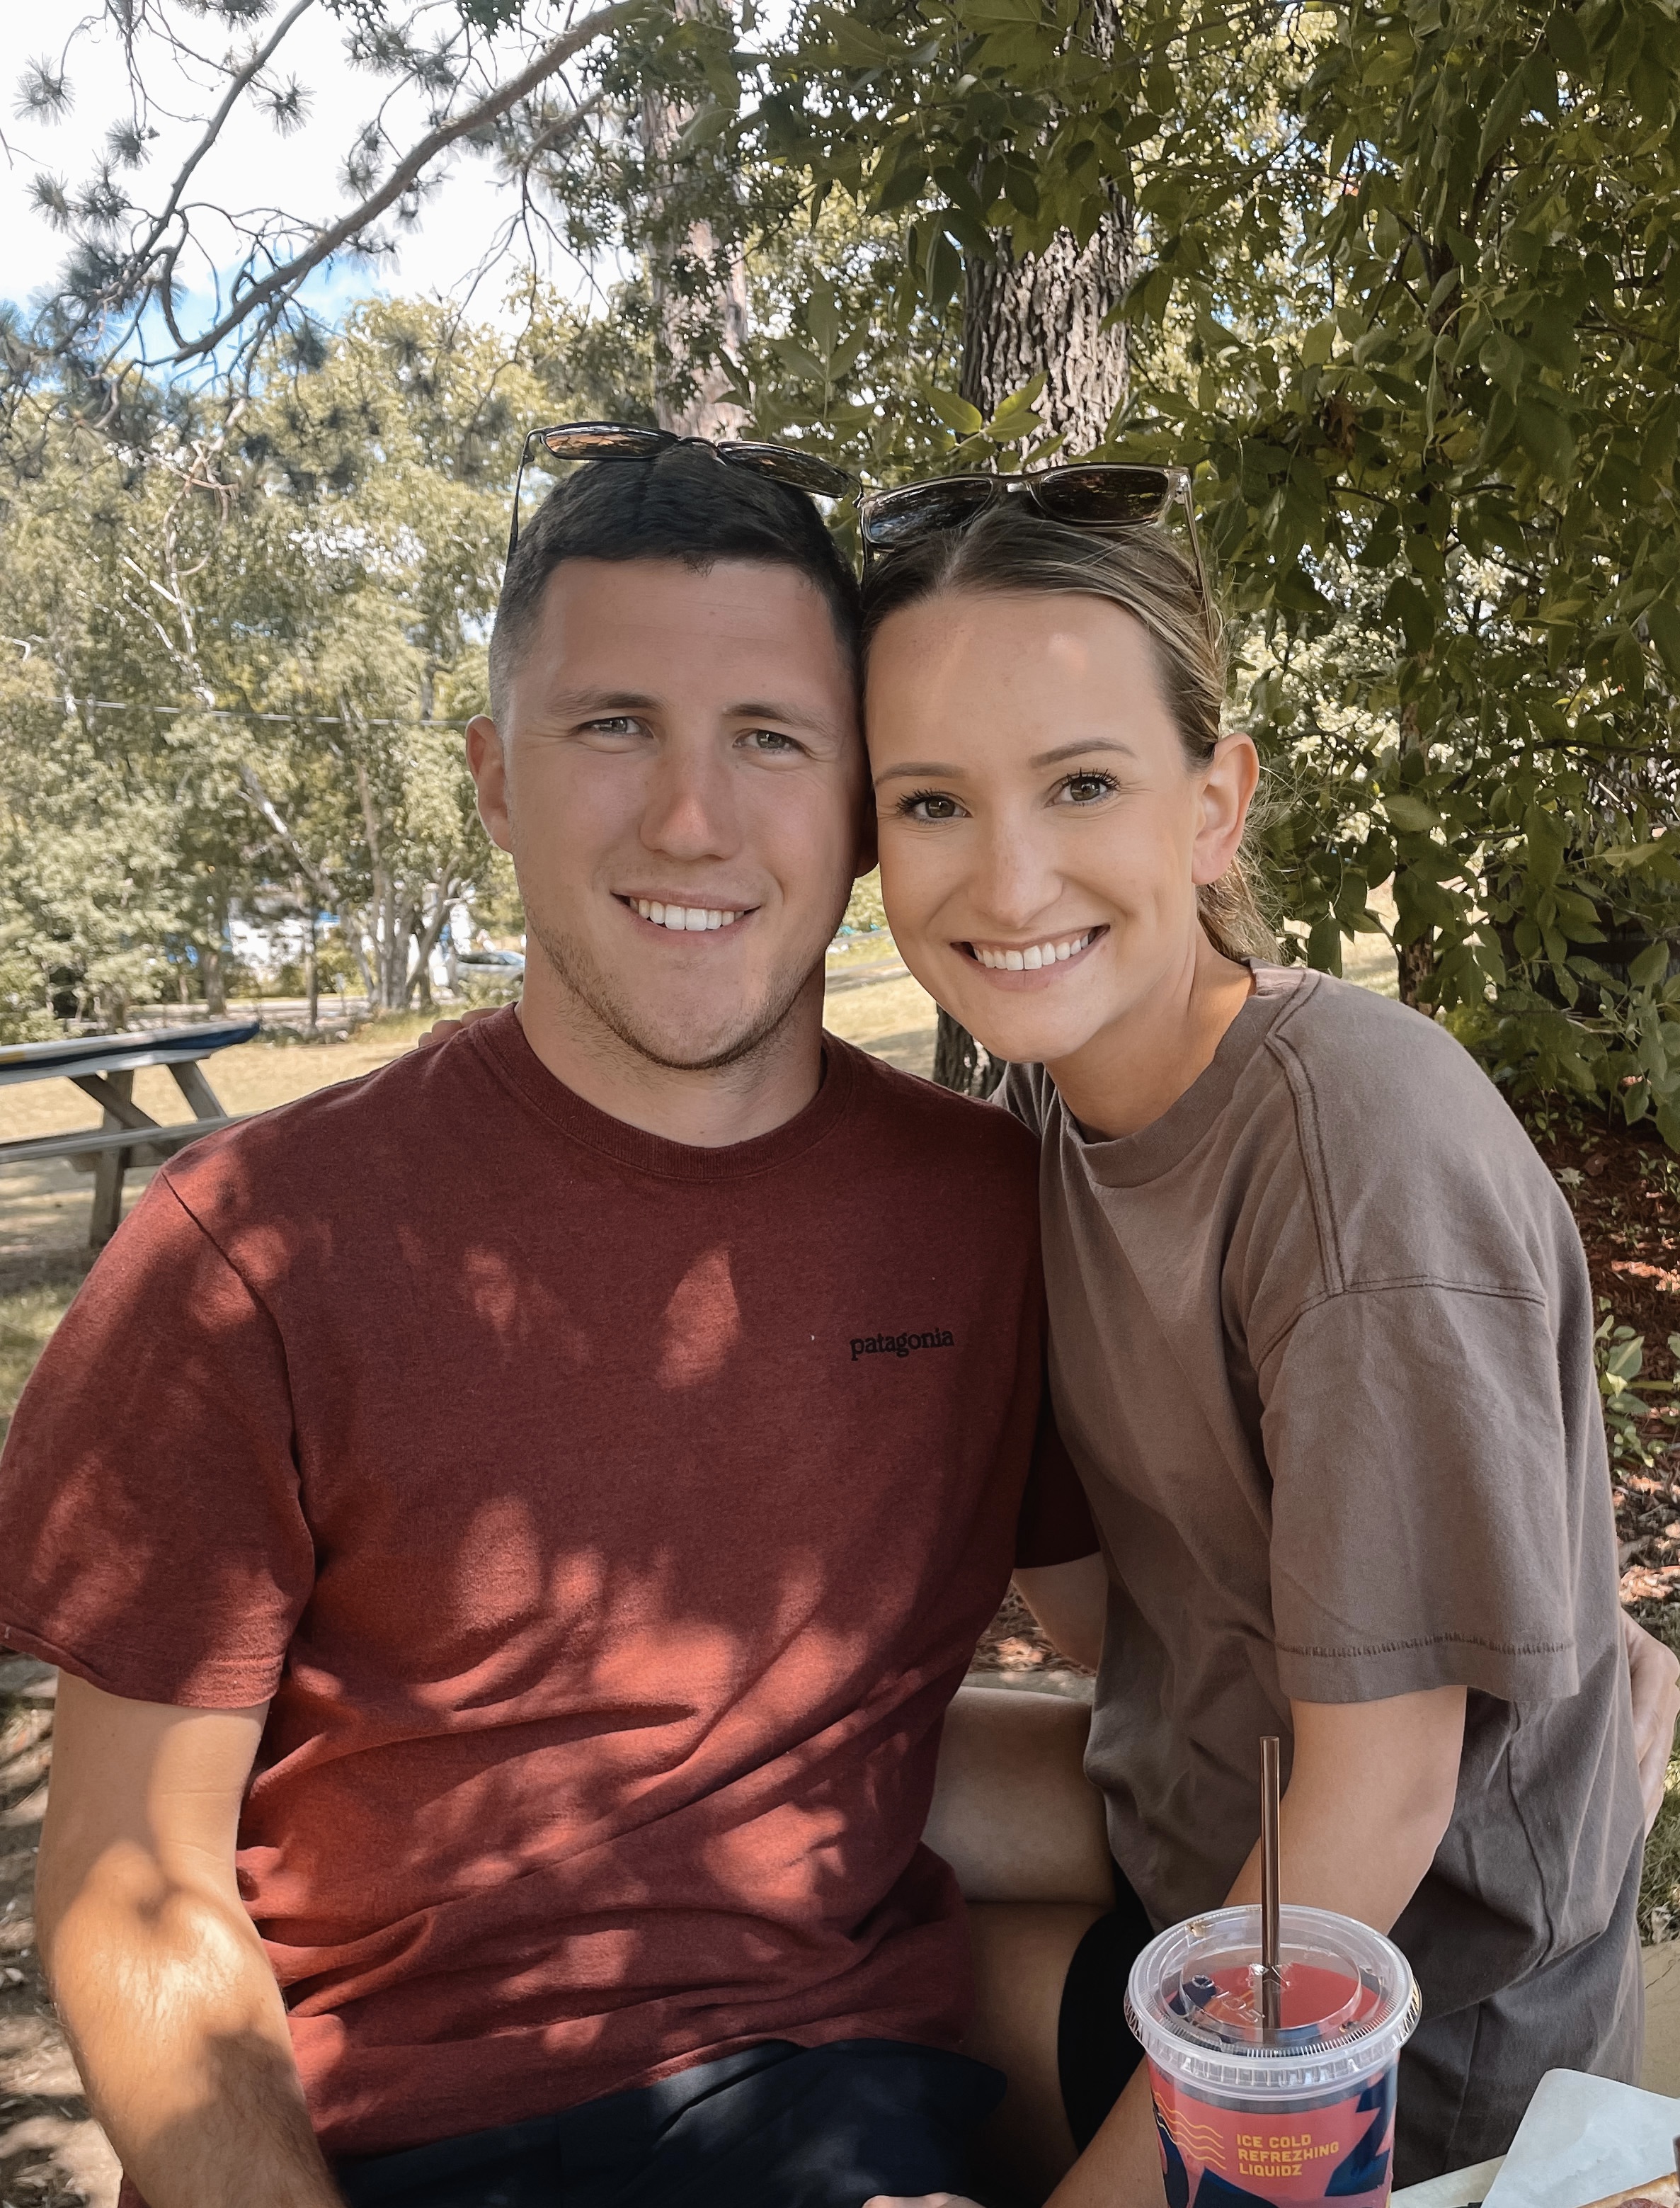 Jacob Norton and his wife sit outdoors in a park, smiling at the camera.